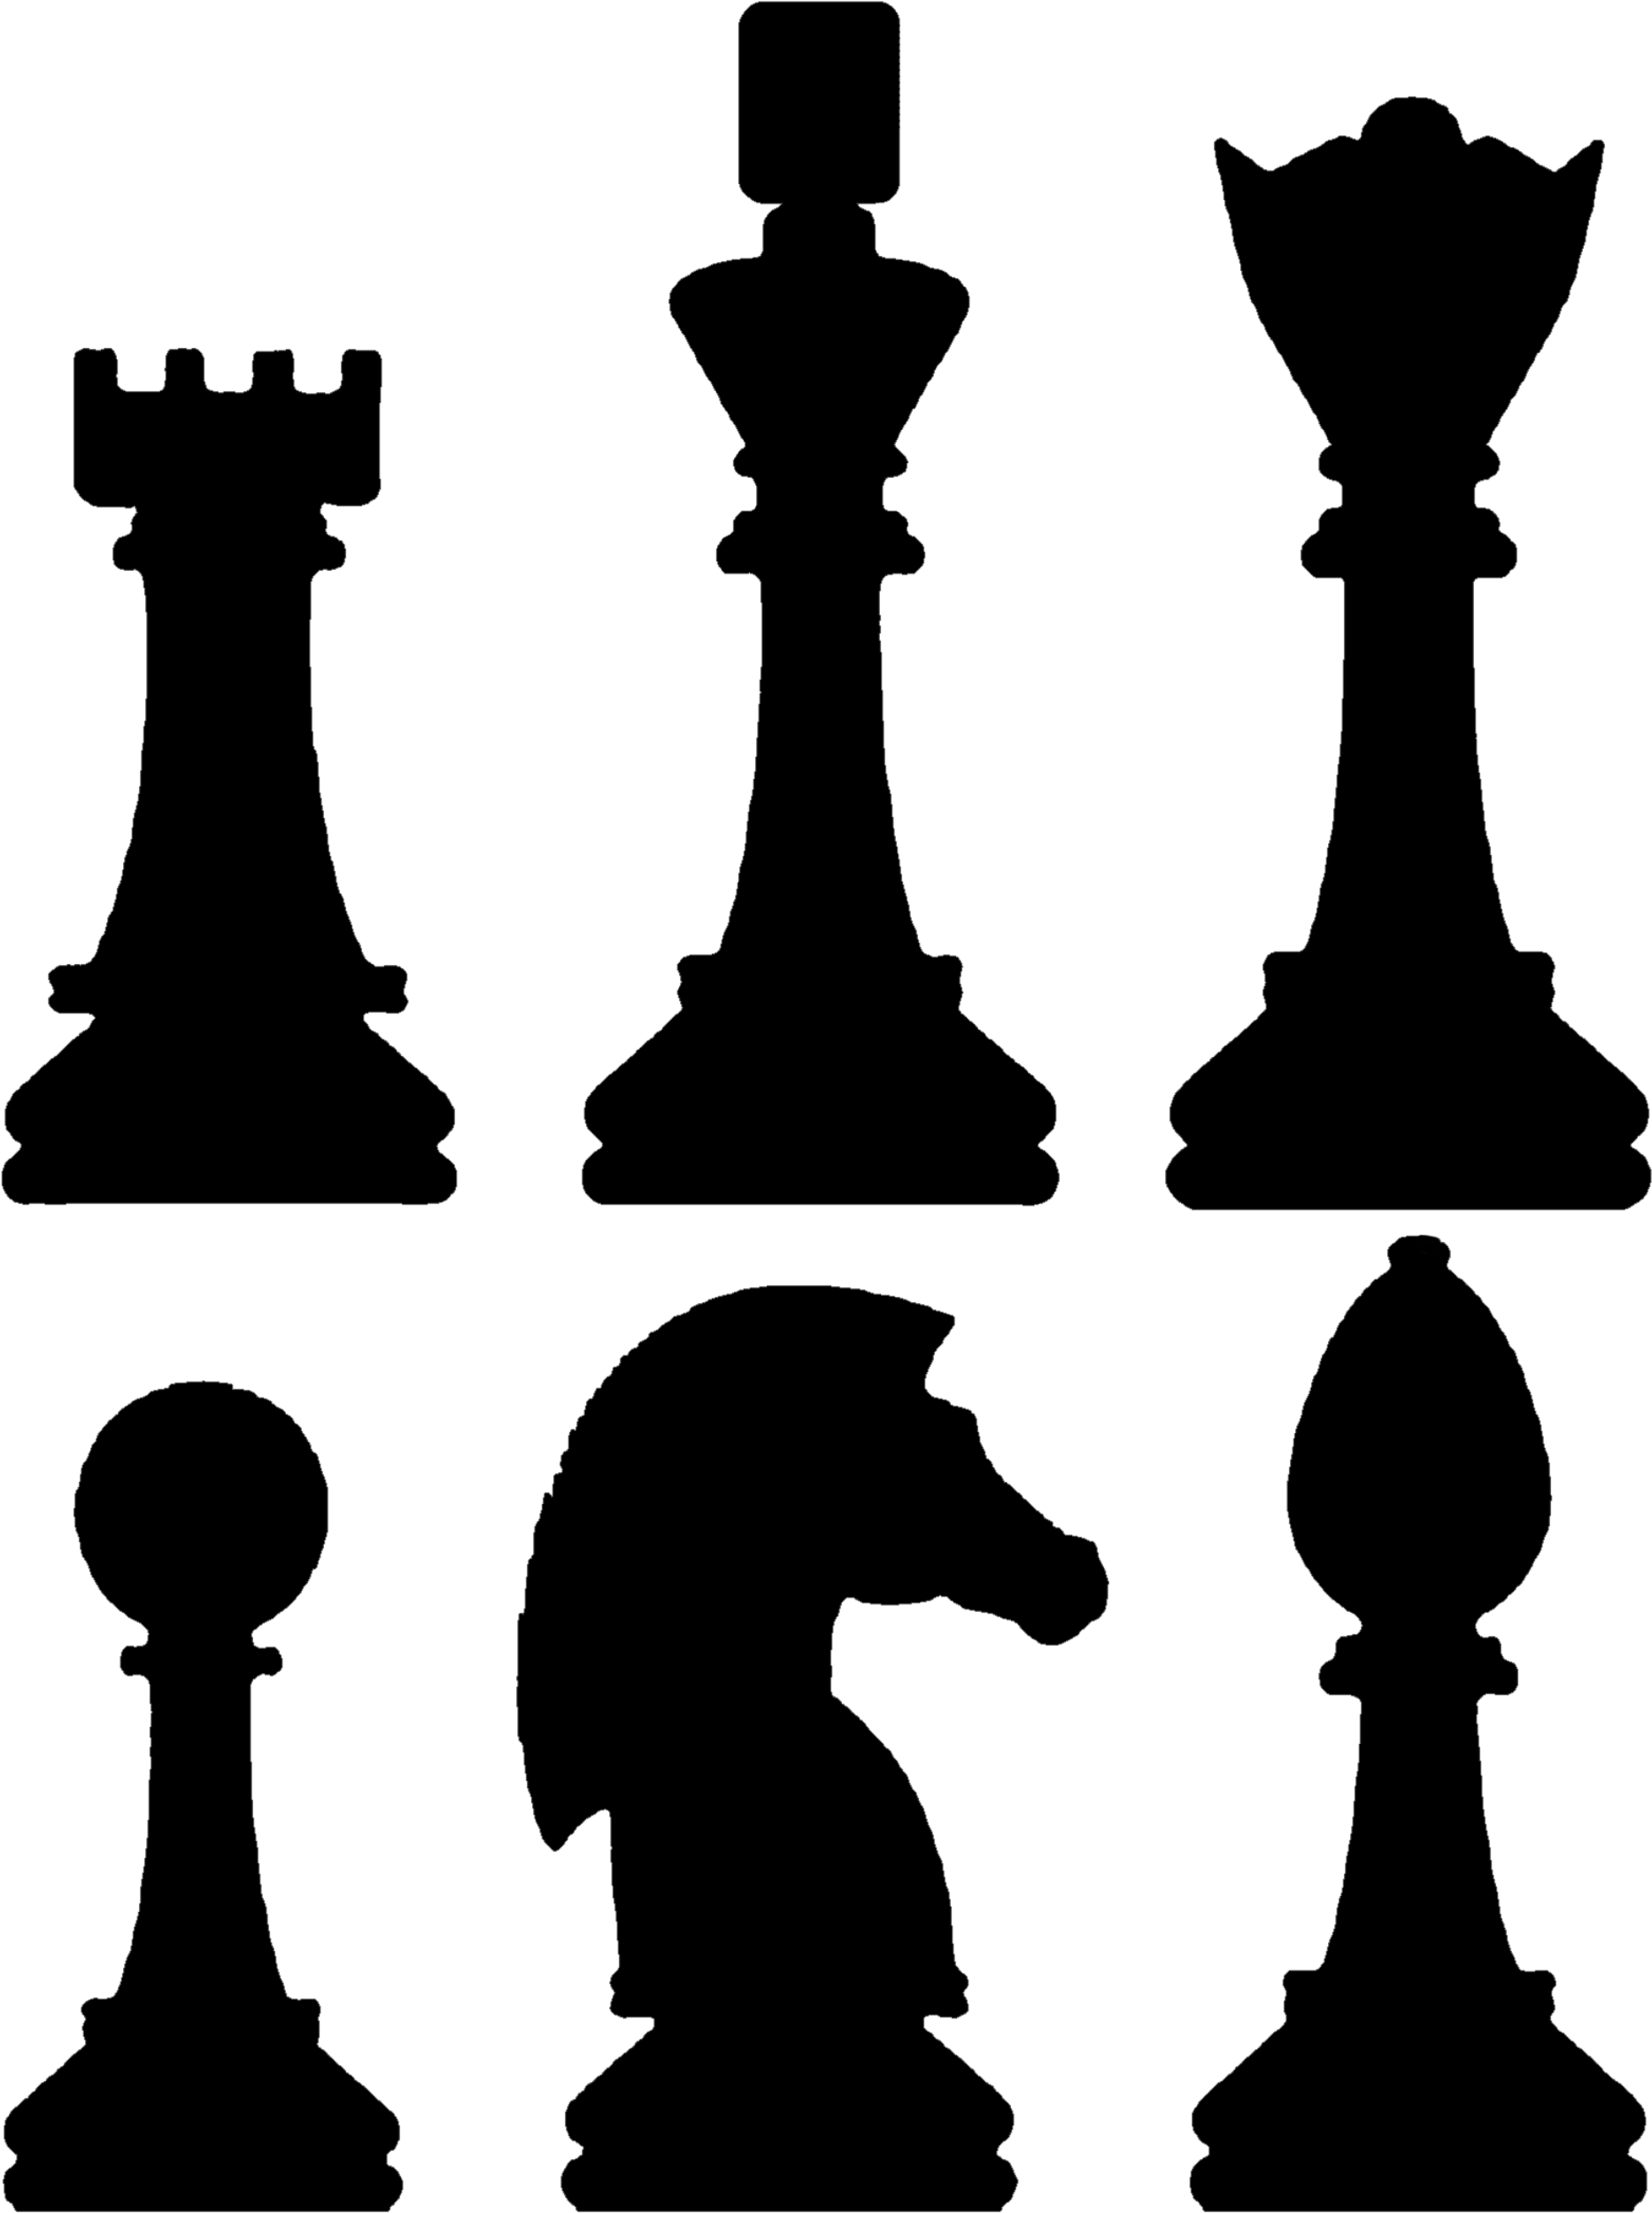 A Black And White Image Of A Chess Piece